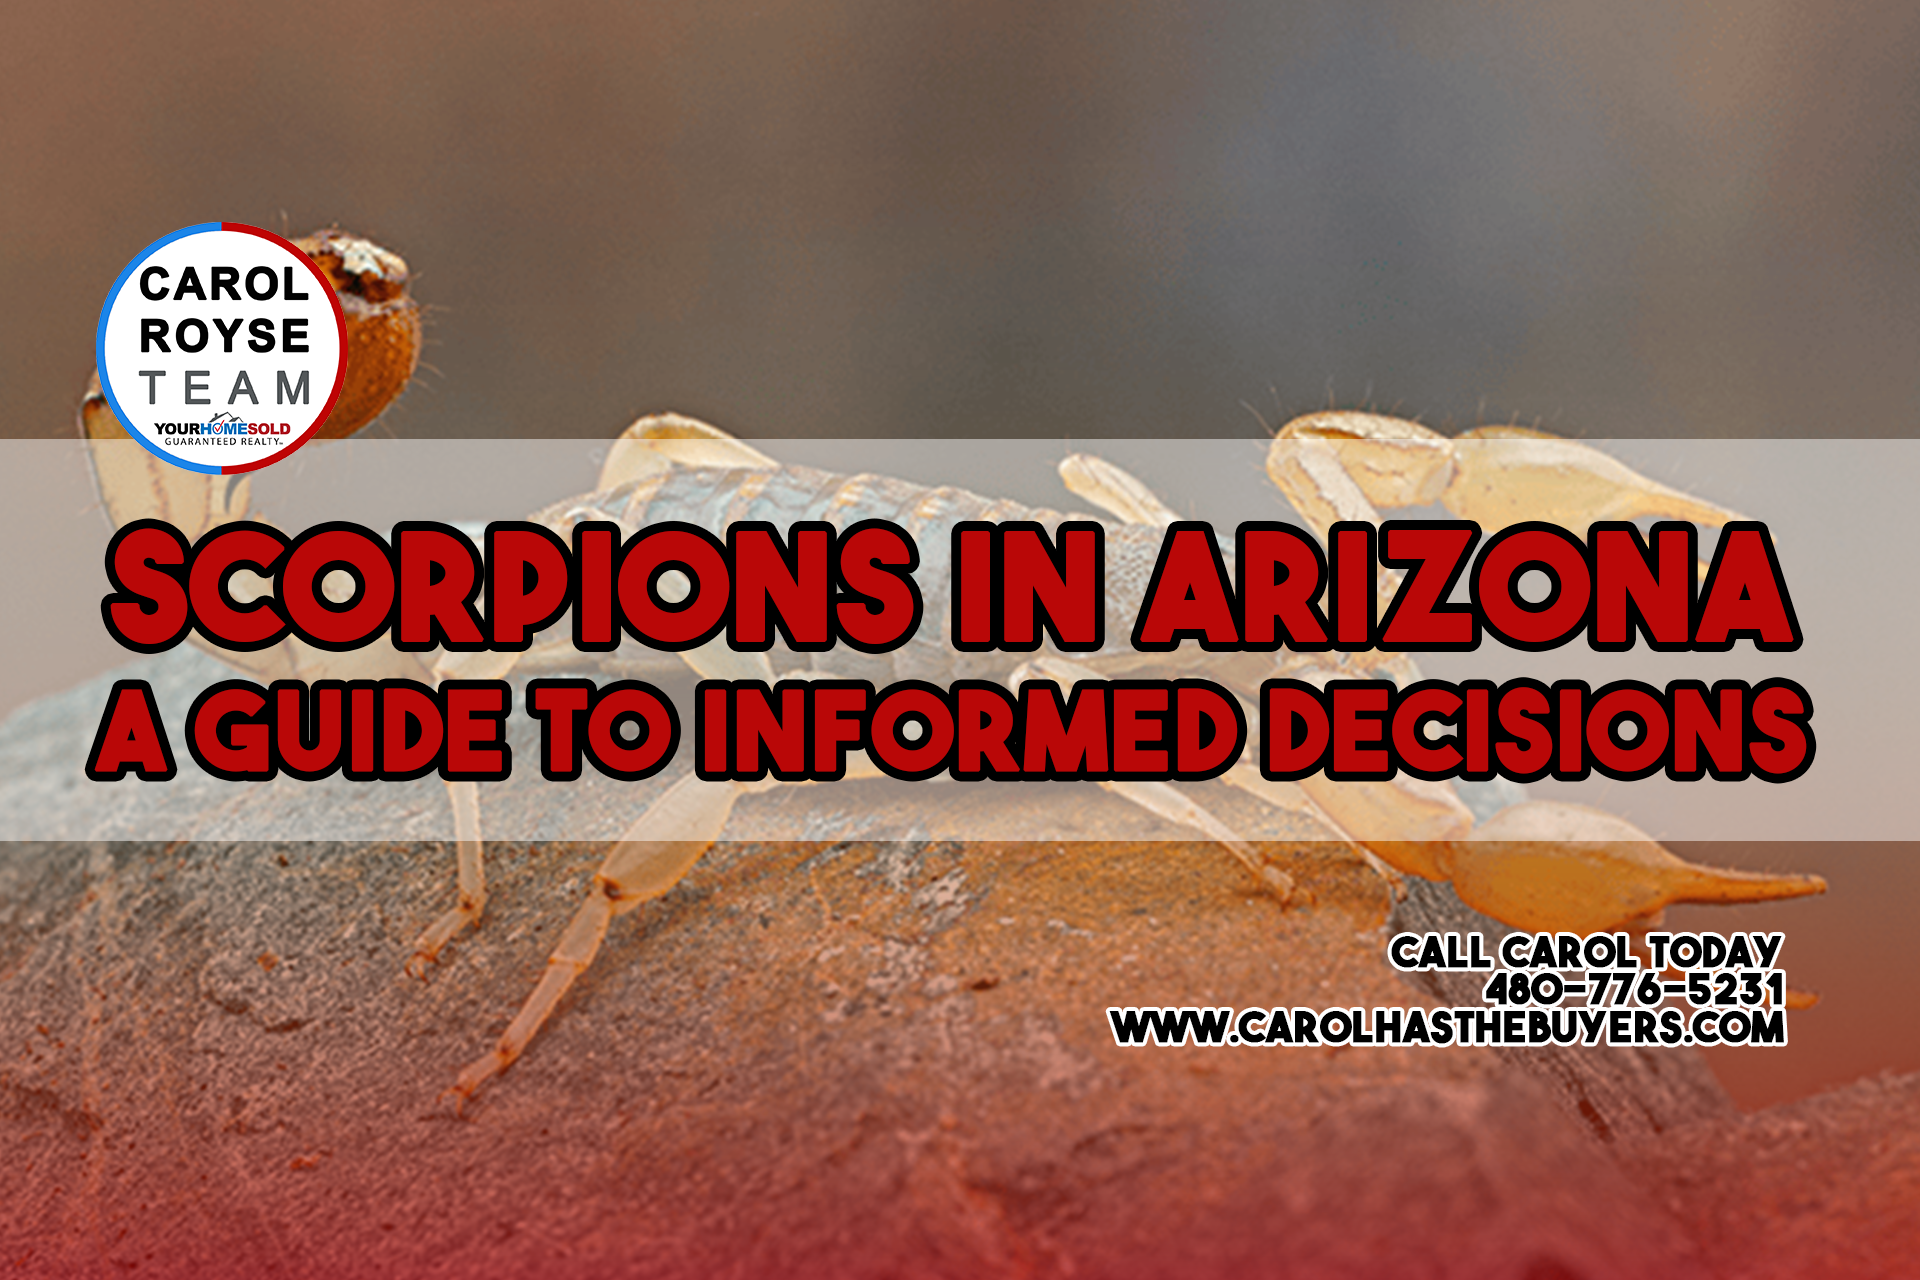 Scorpions in Arizona A Guide to Informed Decisions